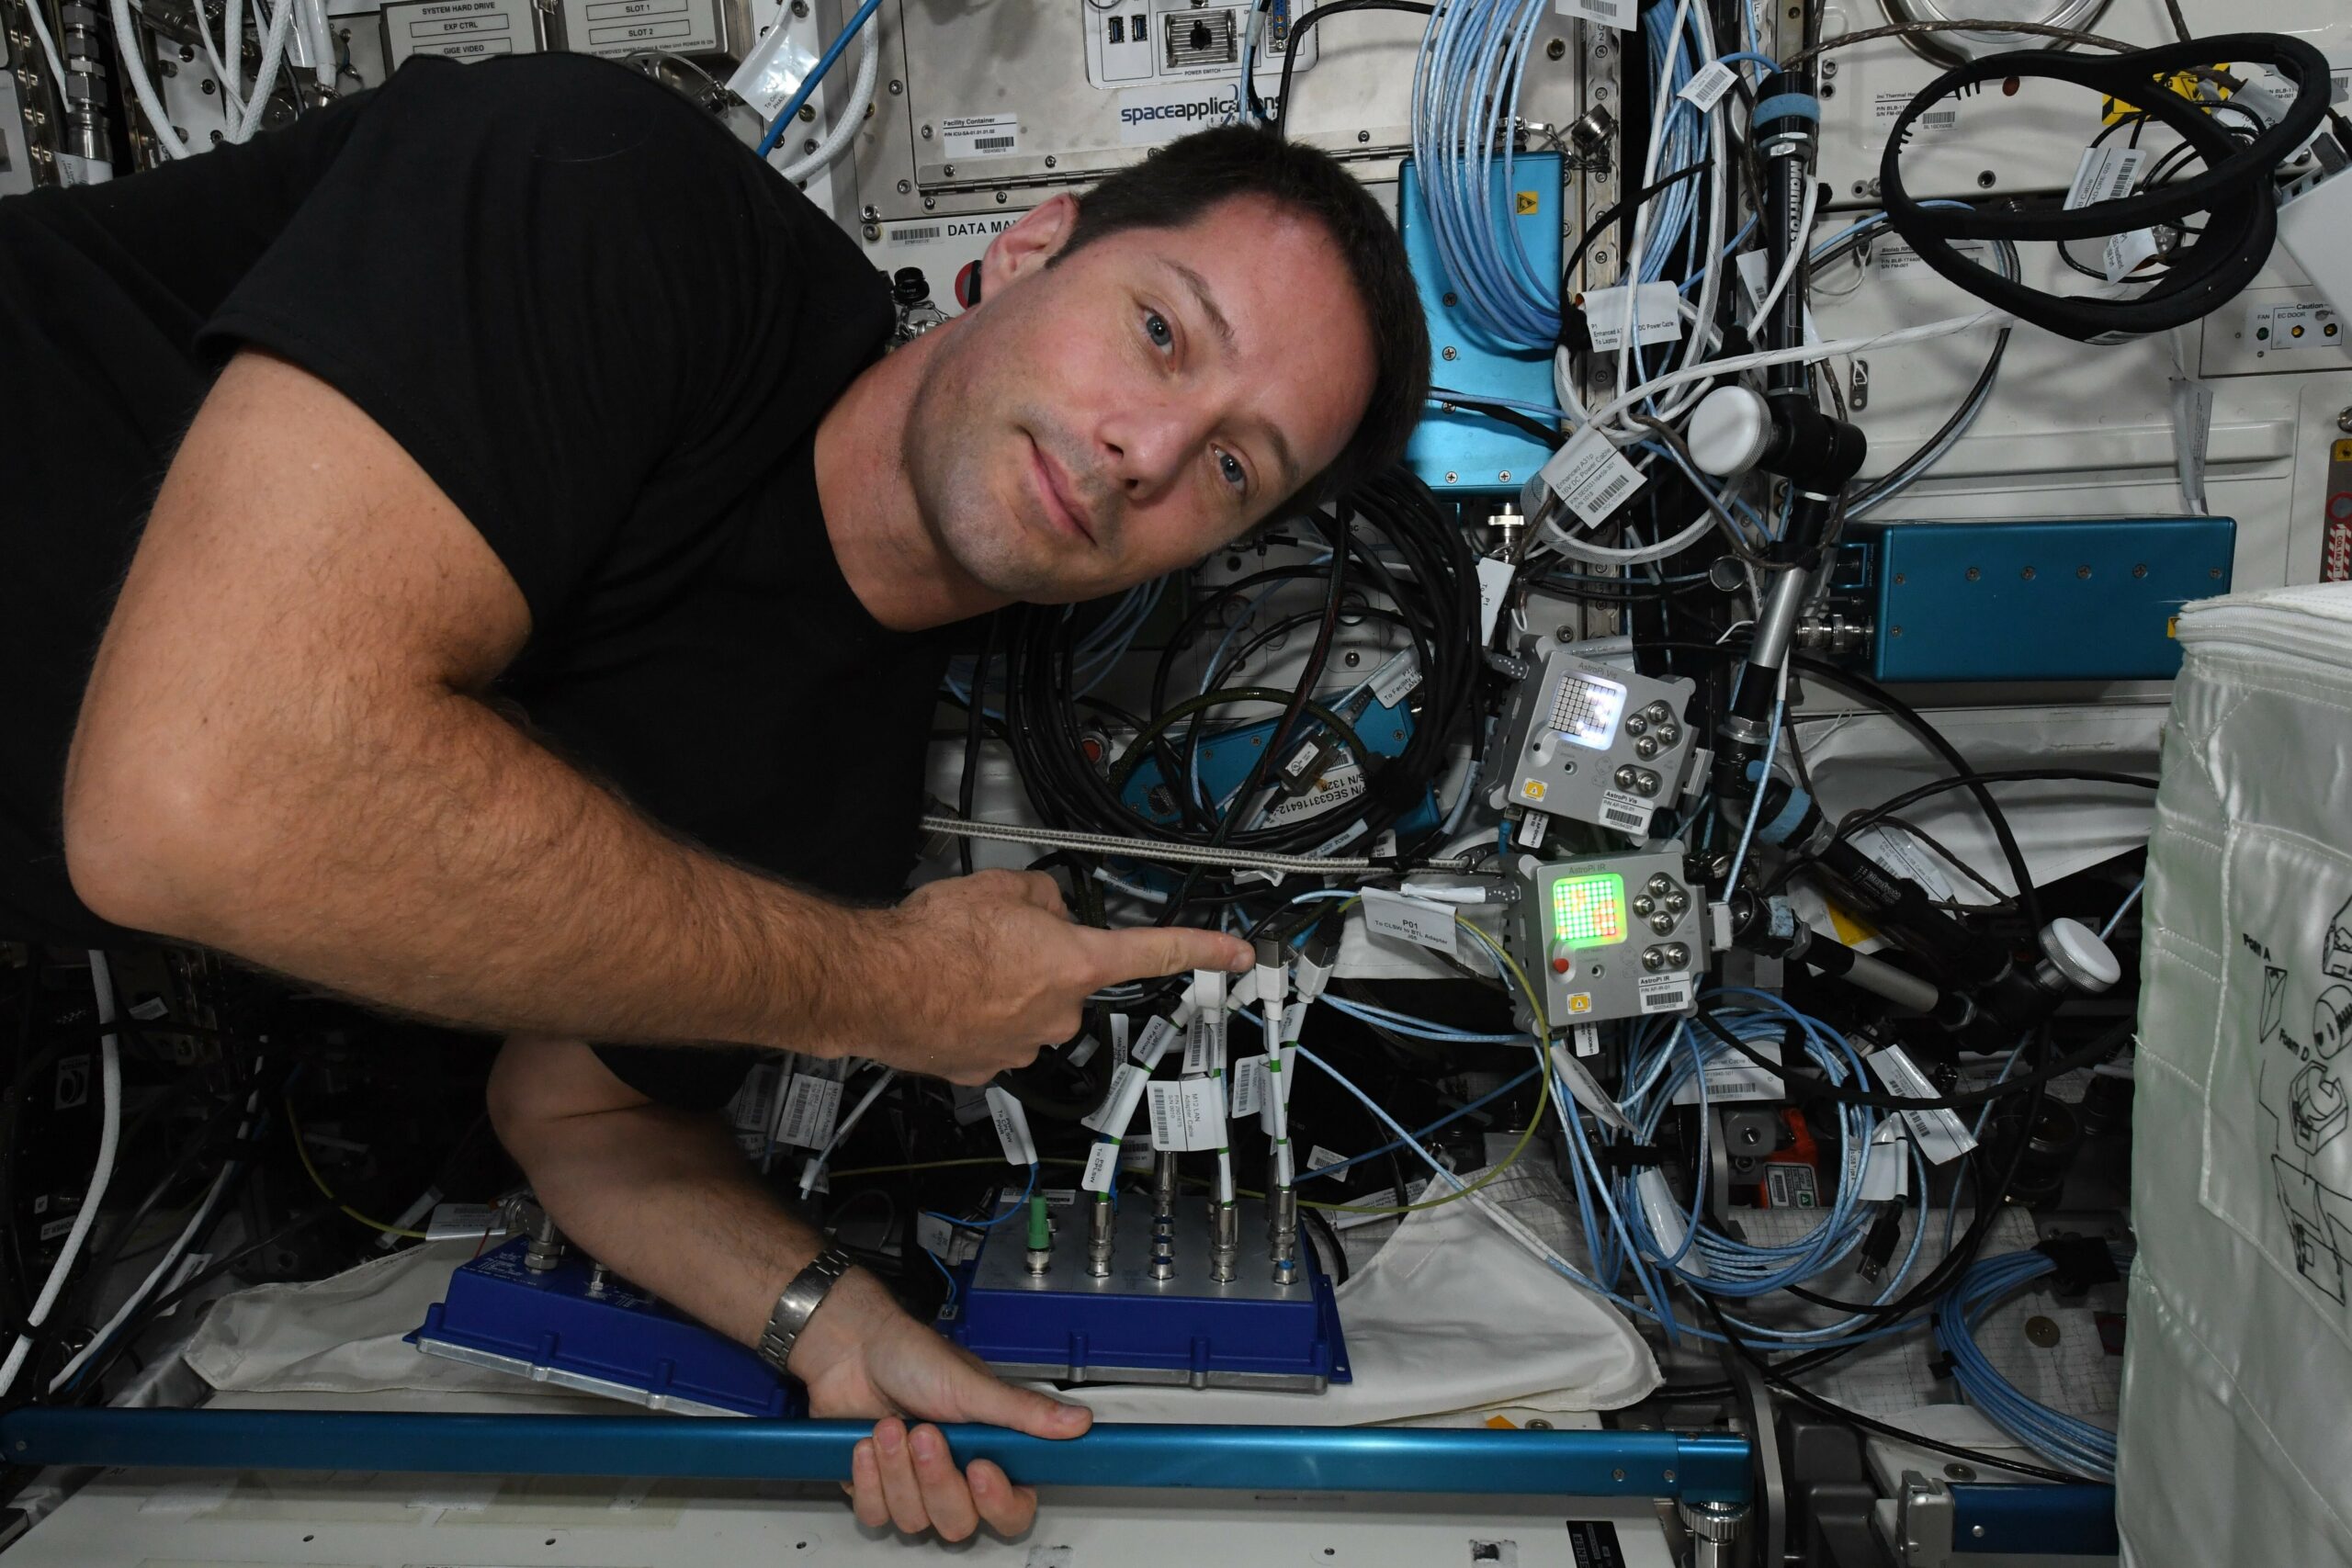 ESA Astronaut Thomas Pesquet with the Astro Pi computers aboard the International Space Station